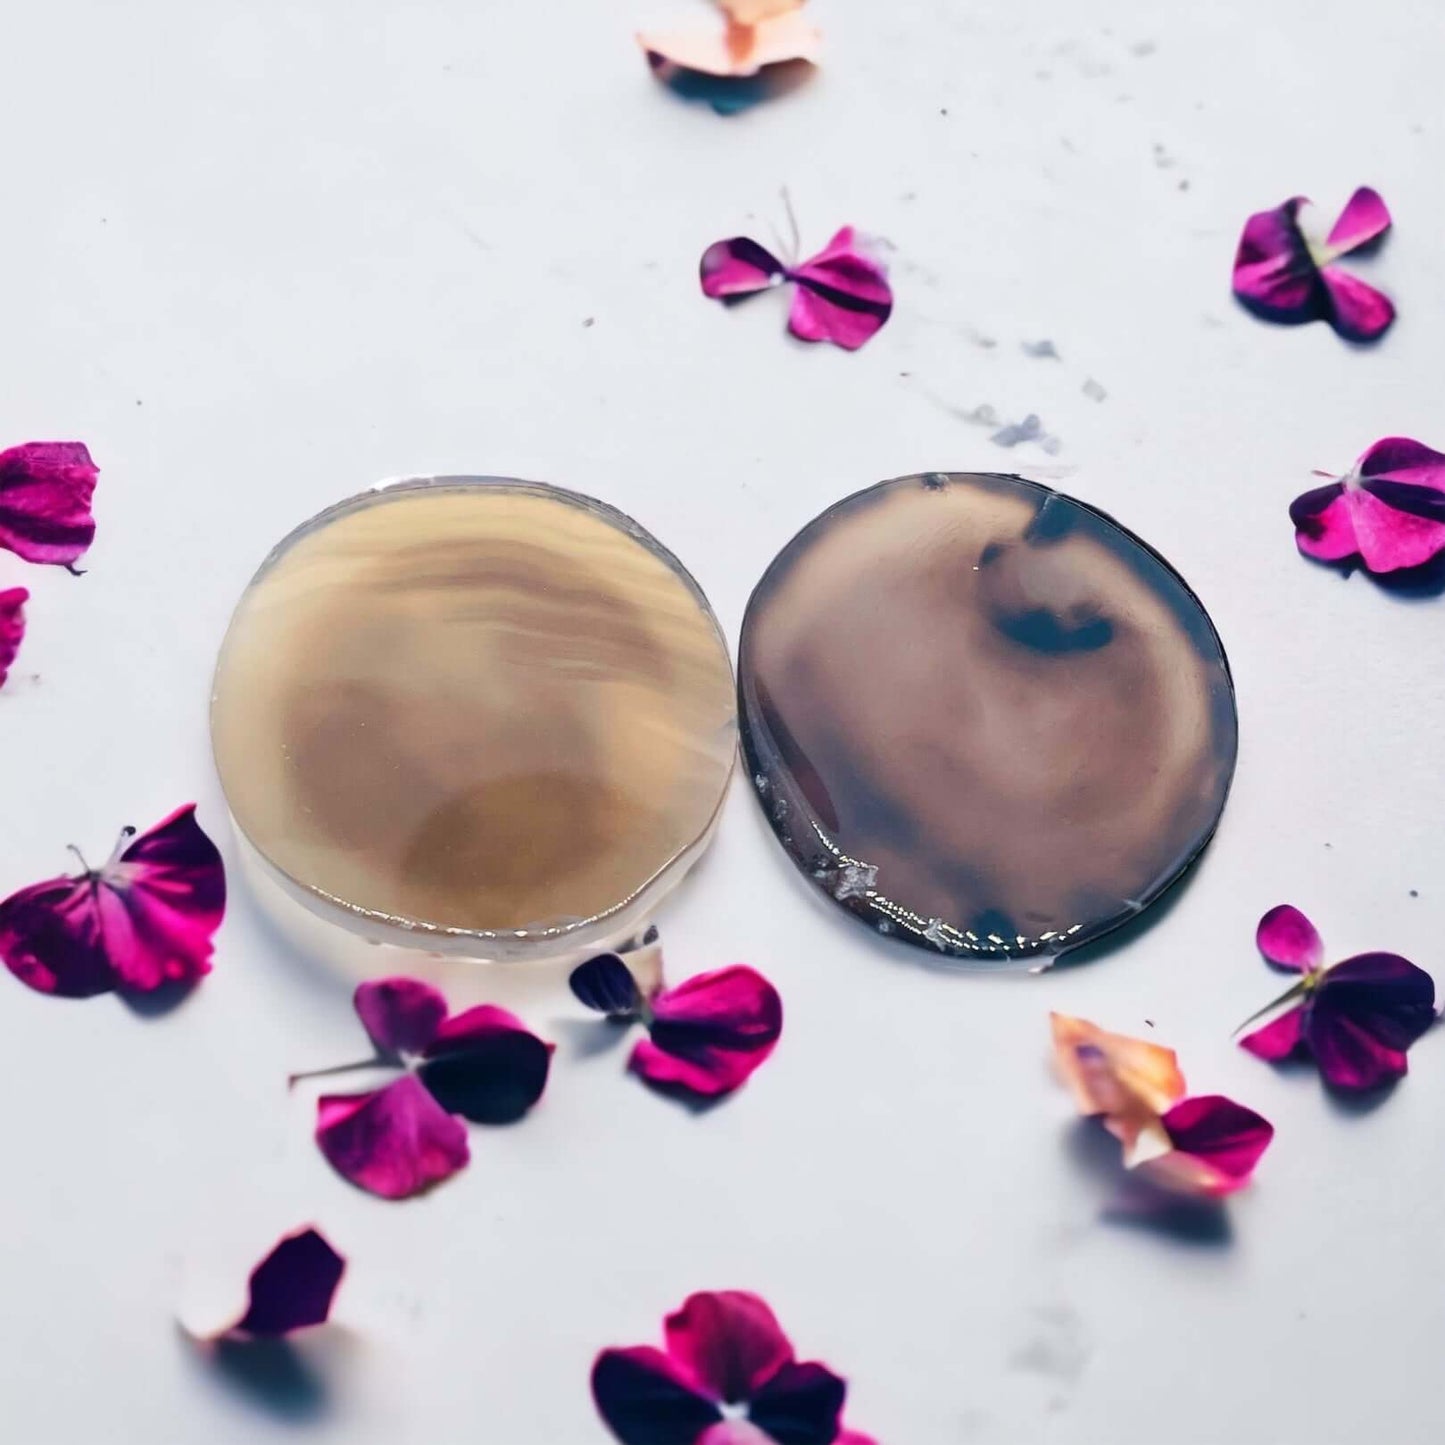 Natural agate pop socket phone holder with petals on white background